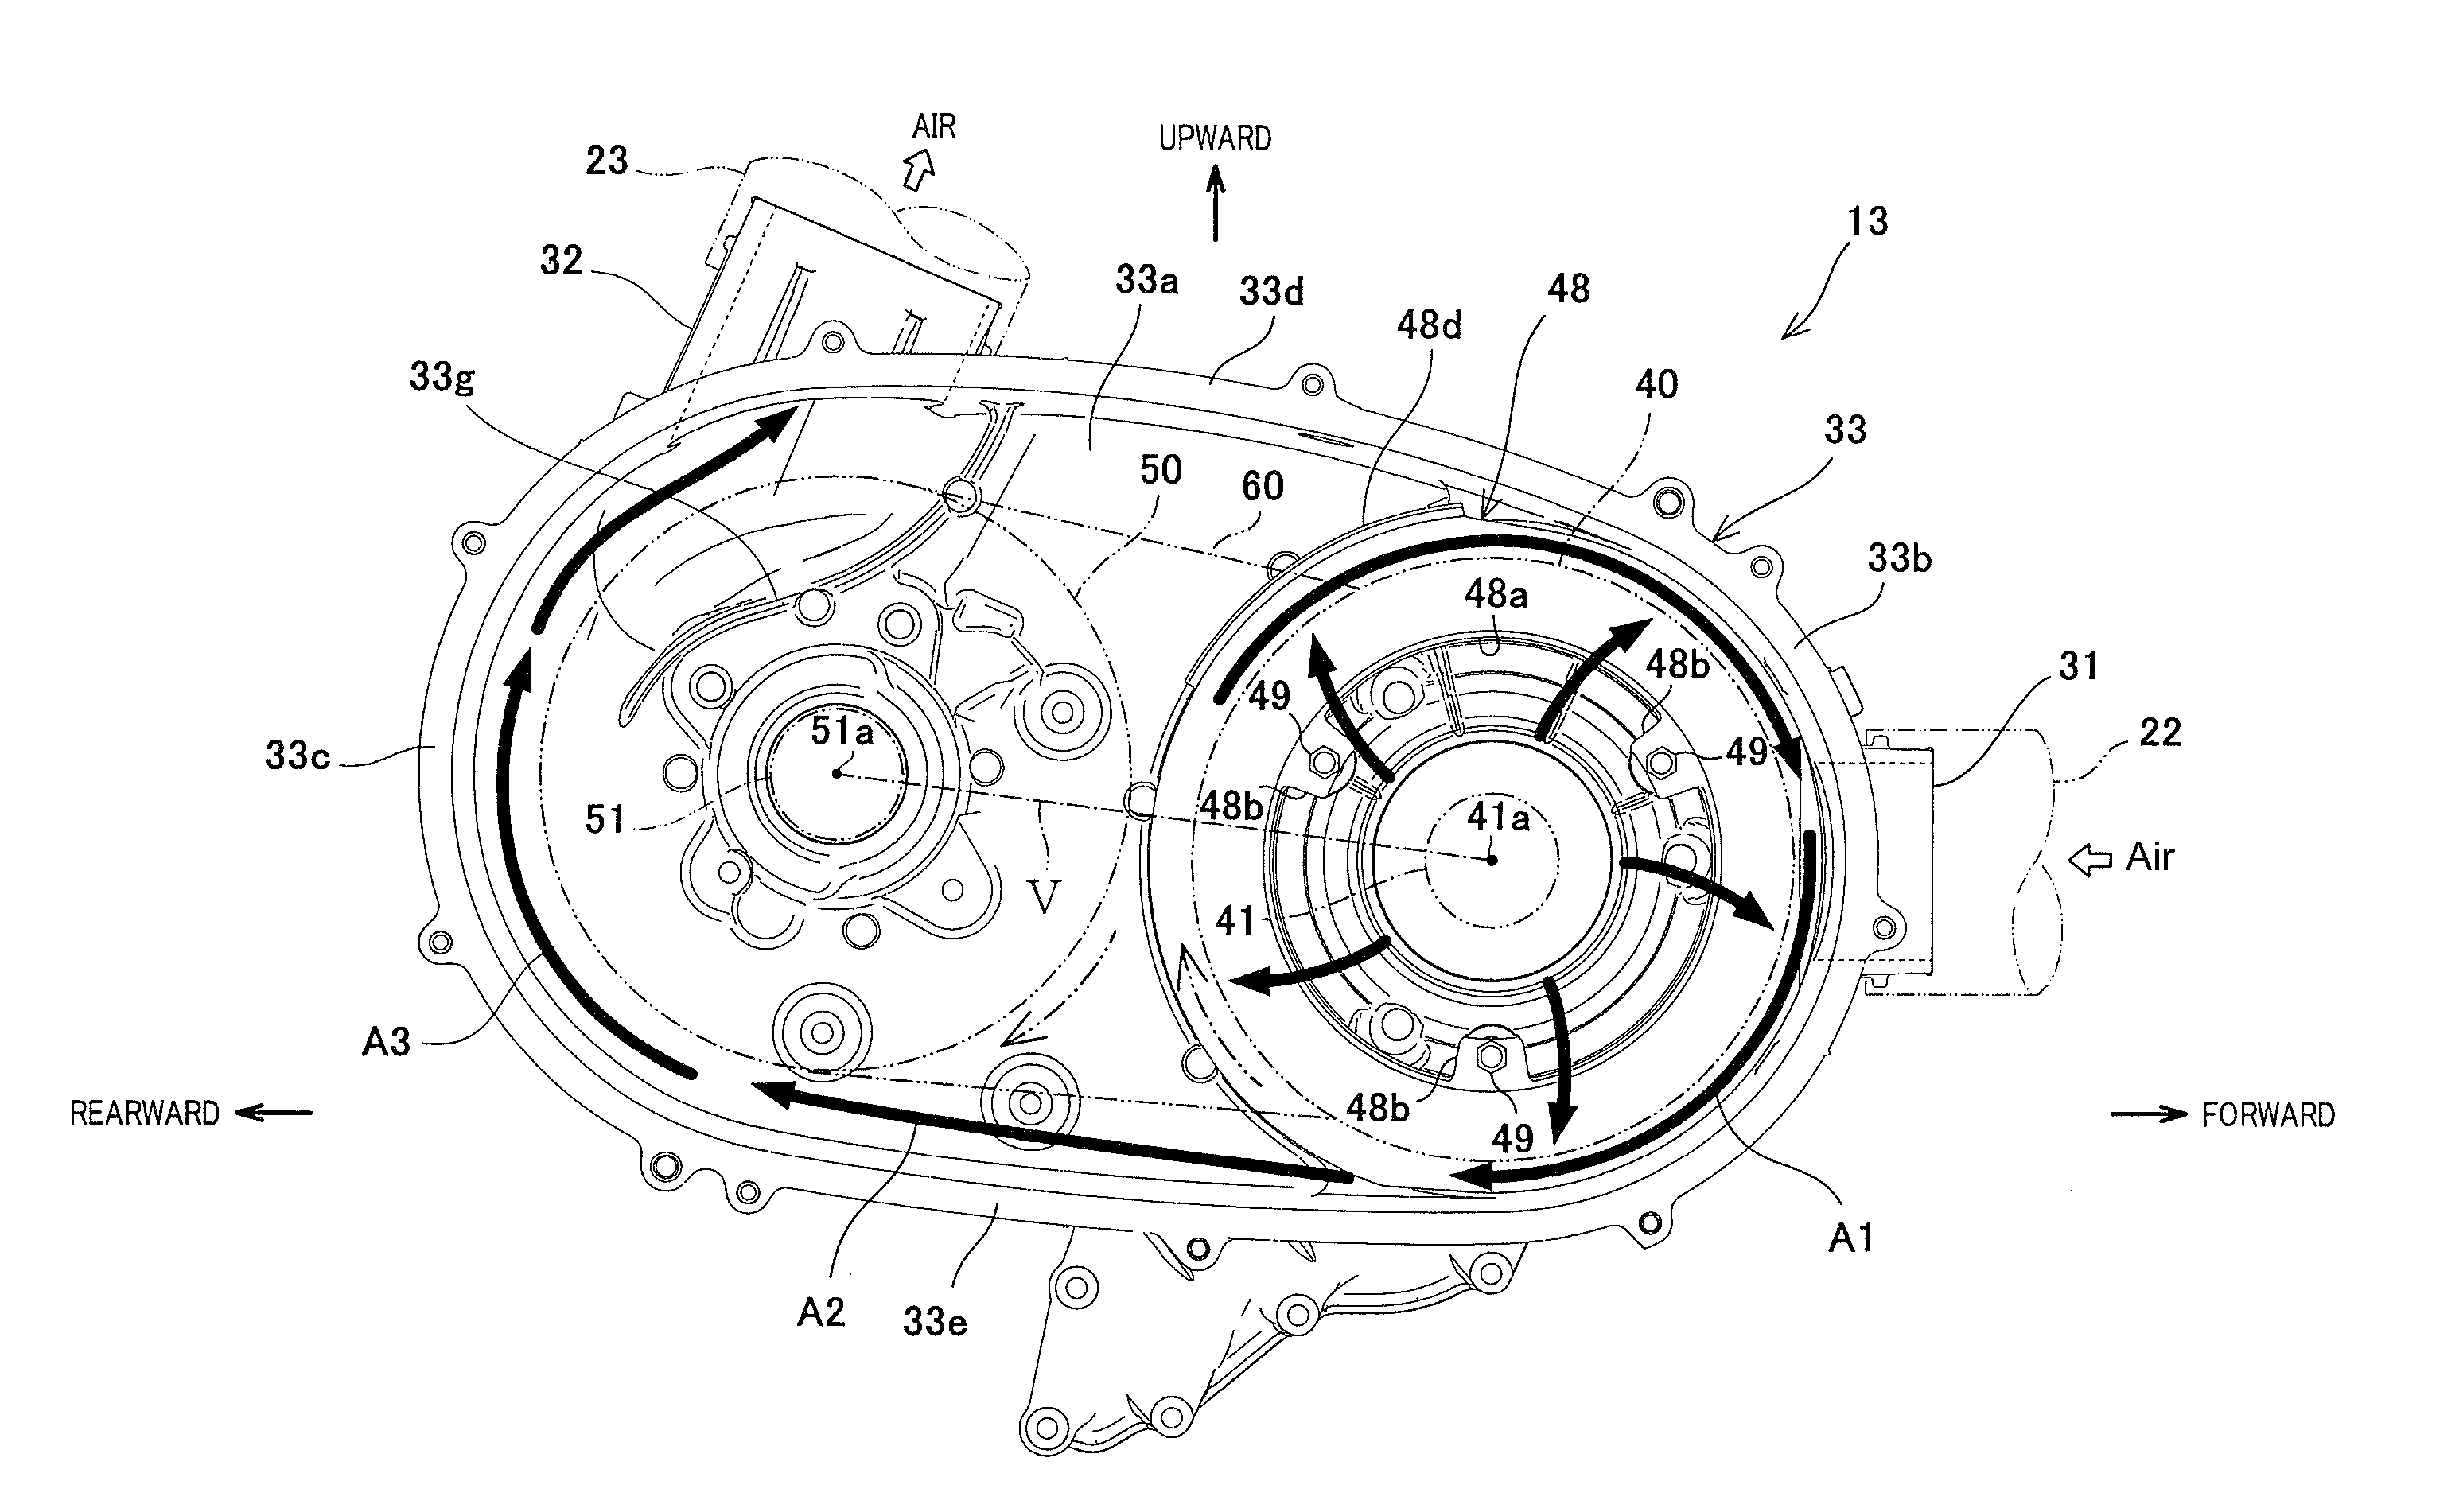 Belt type continuously variable transmission